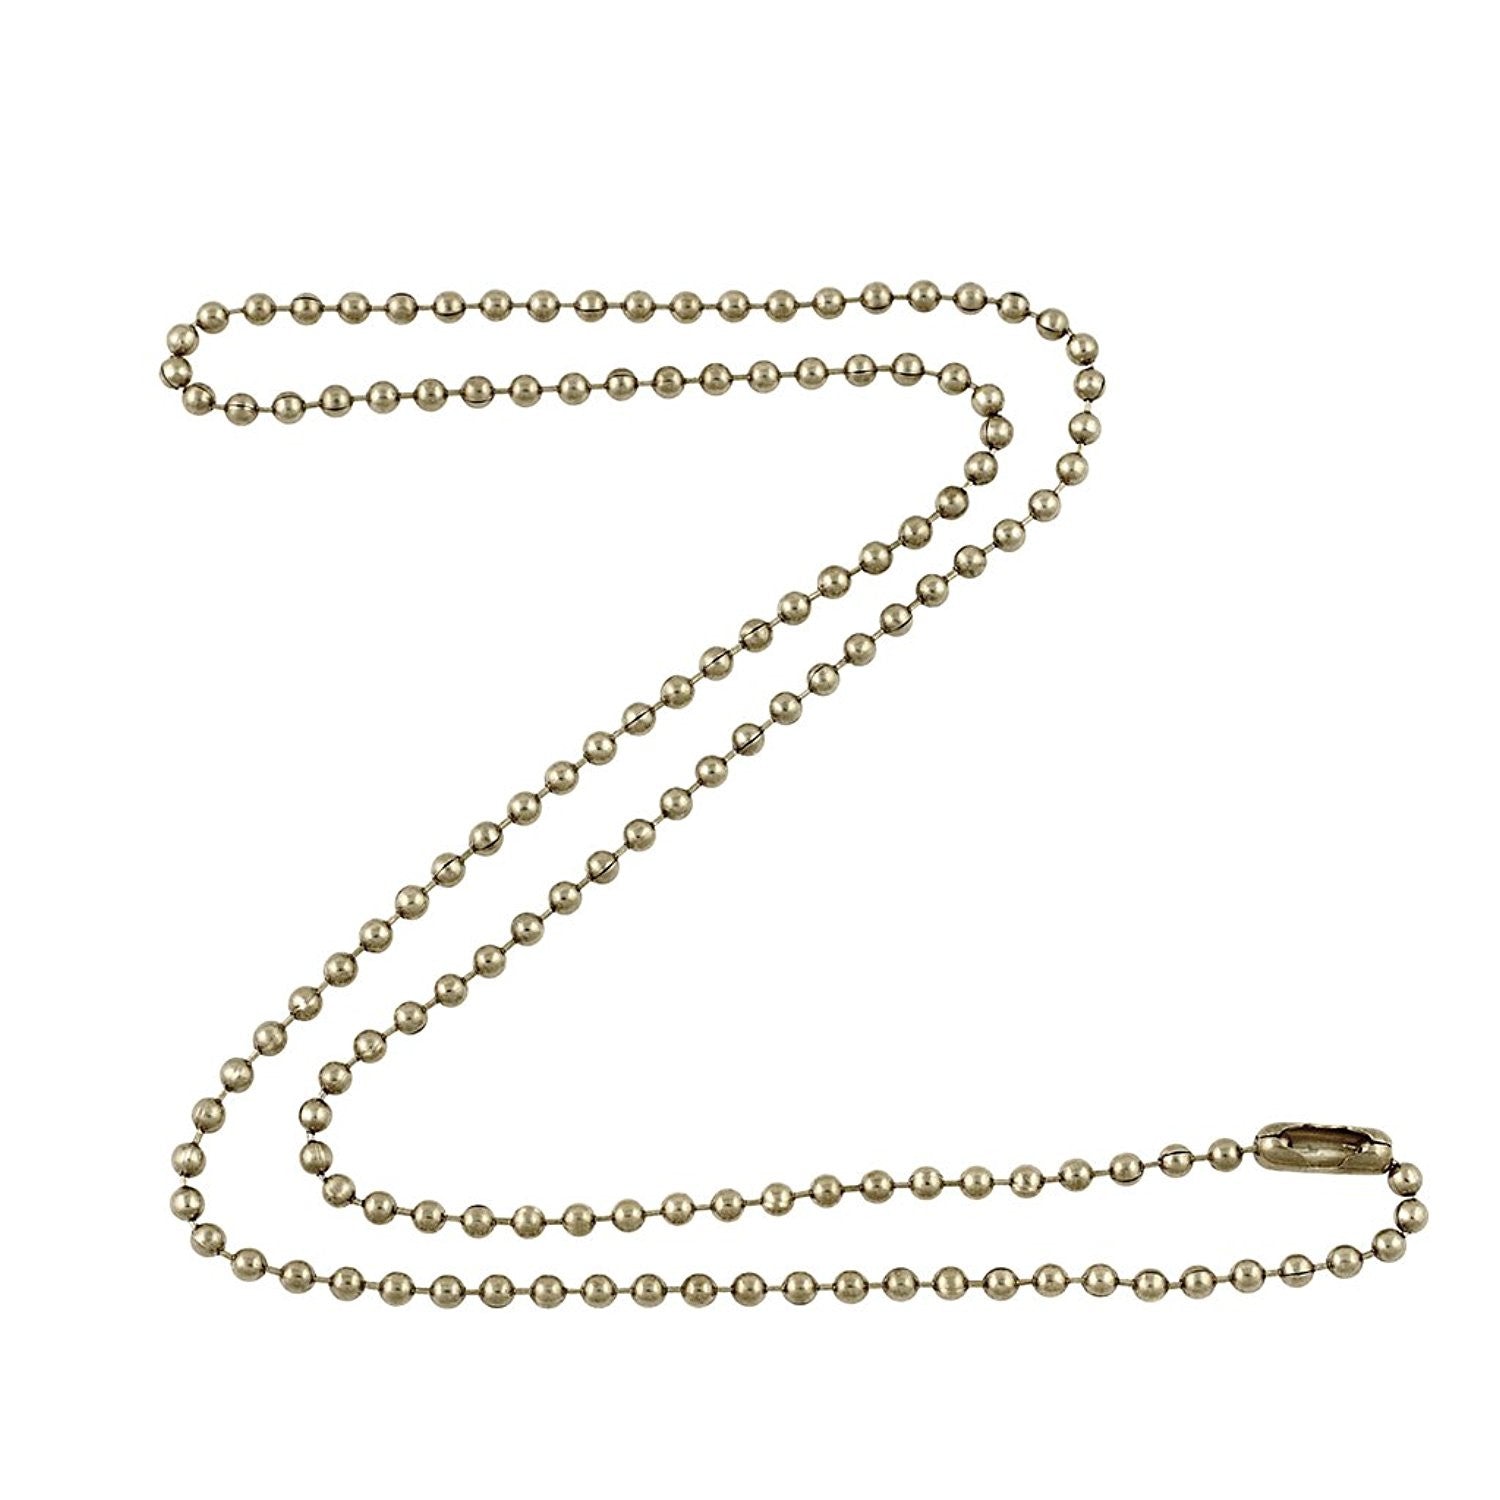 2.4mm Rope Chain Necklace, Sterling Silver, Men's Necklaces